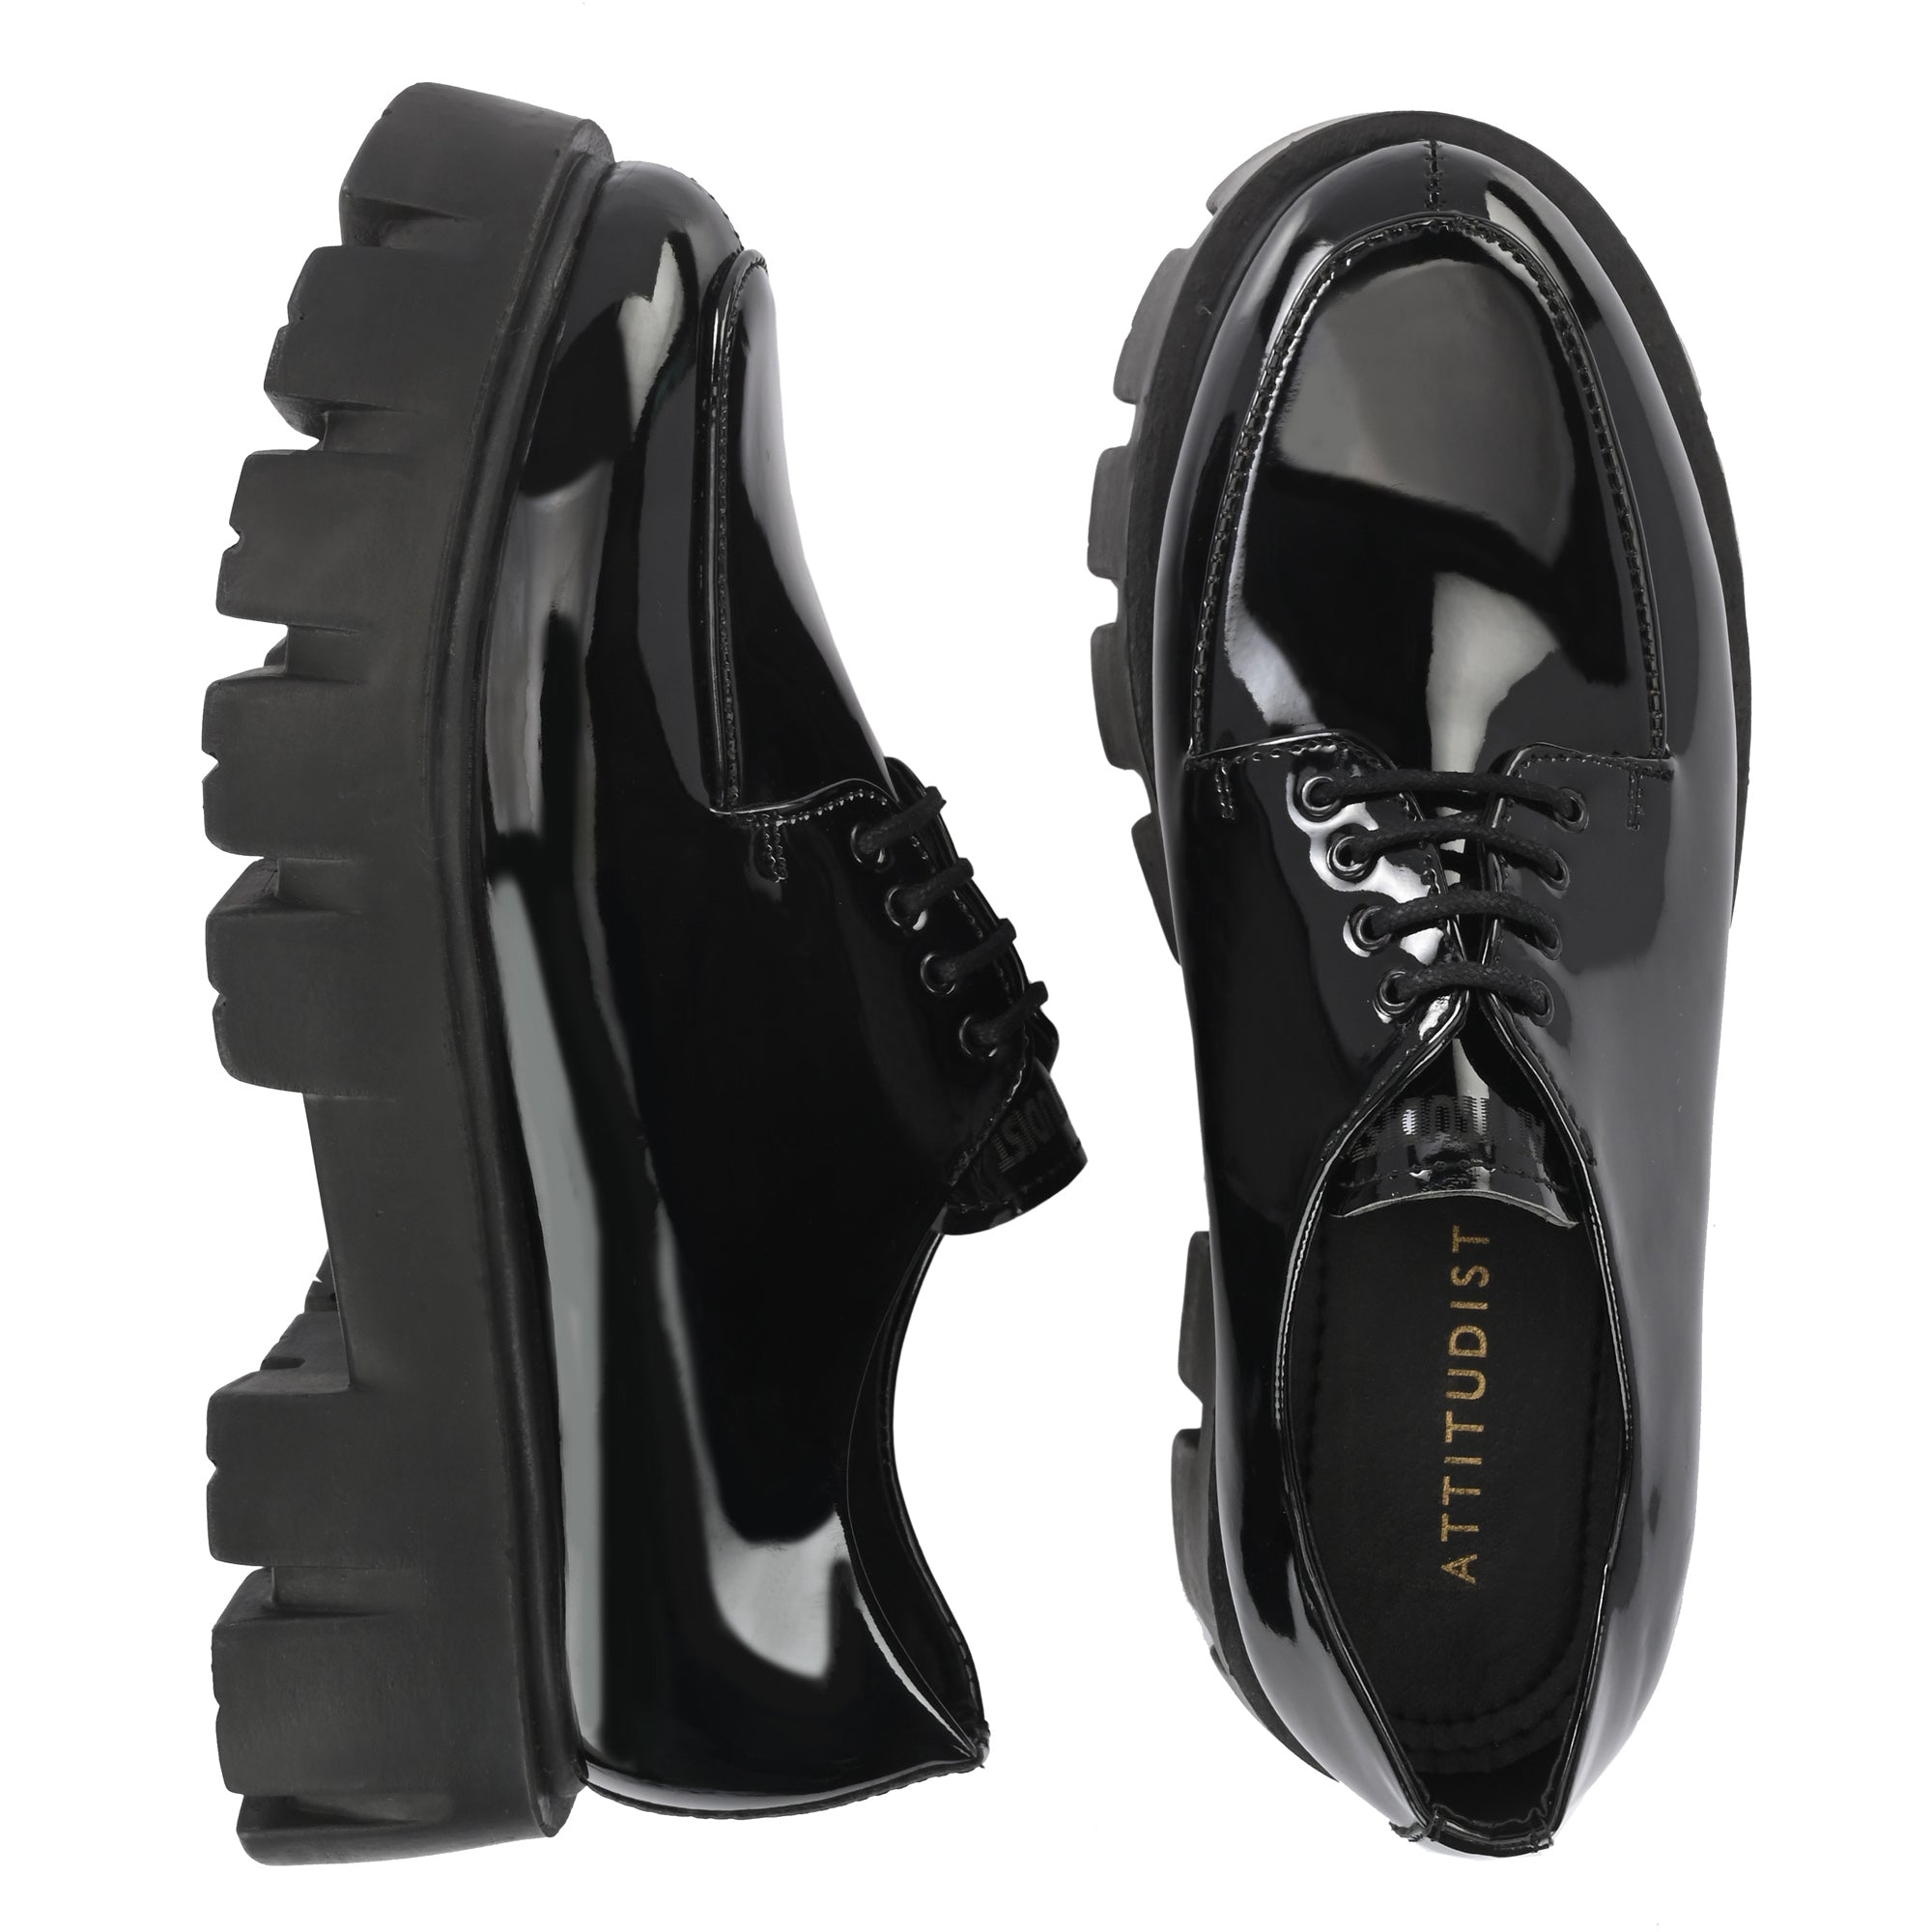 WEH 2023 Fashion Black Formal Dress Formal Shoes For Men For Men Pointed  Leather High Heels With Lace Up Heel And Elegant Design From Peiruu, $51.29  | DHgate.Com